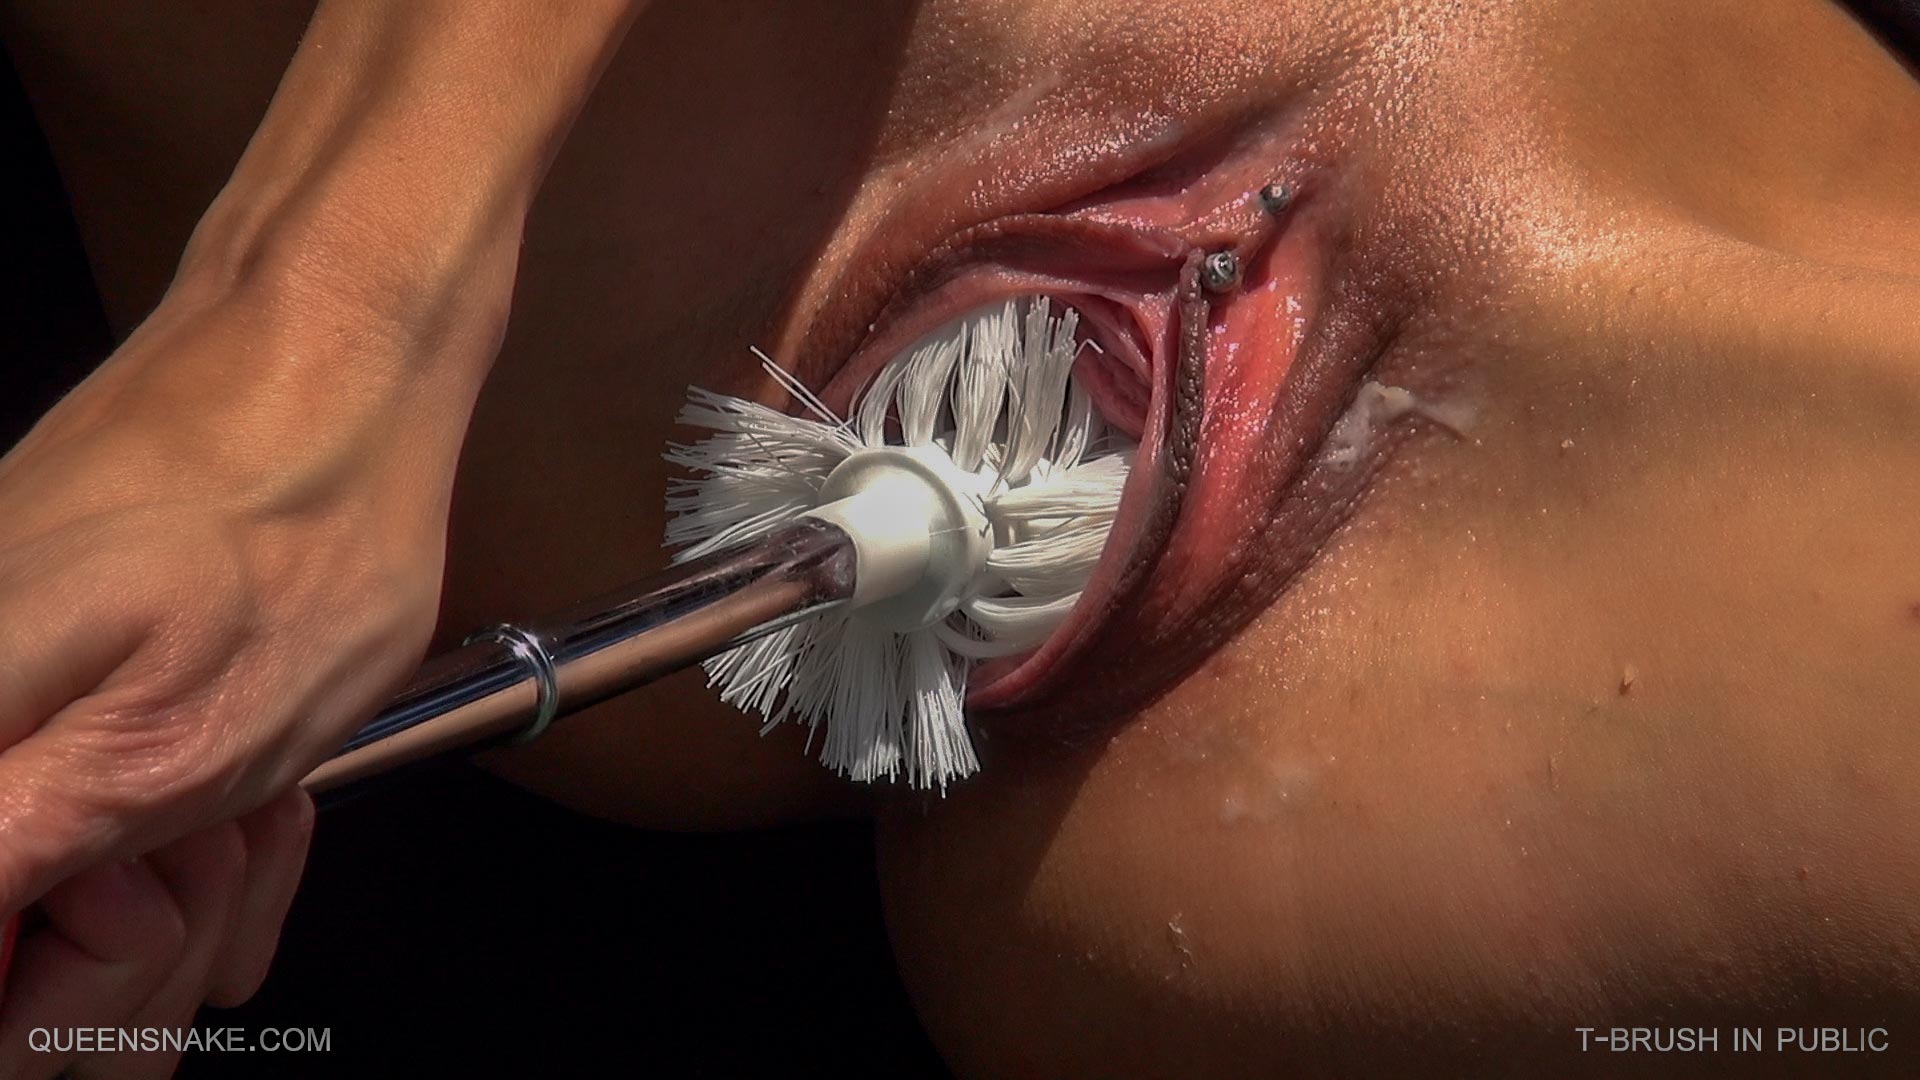 Anal with brush